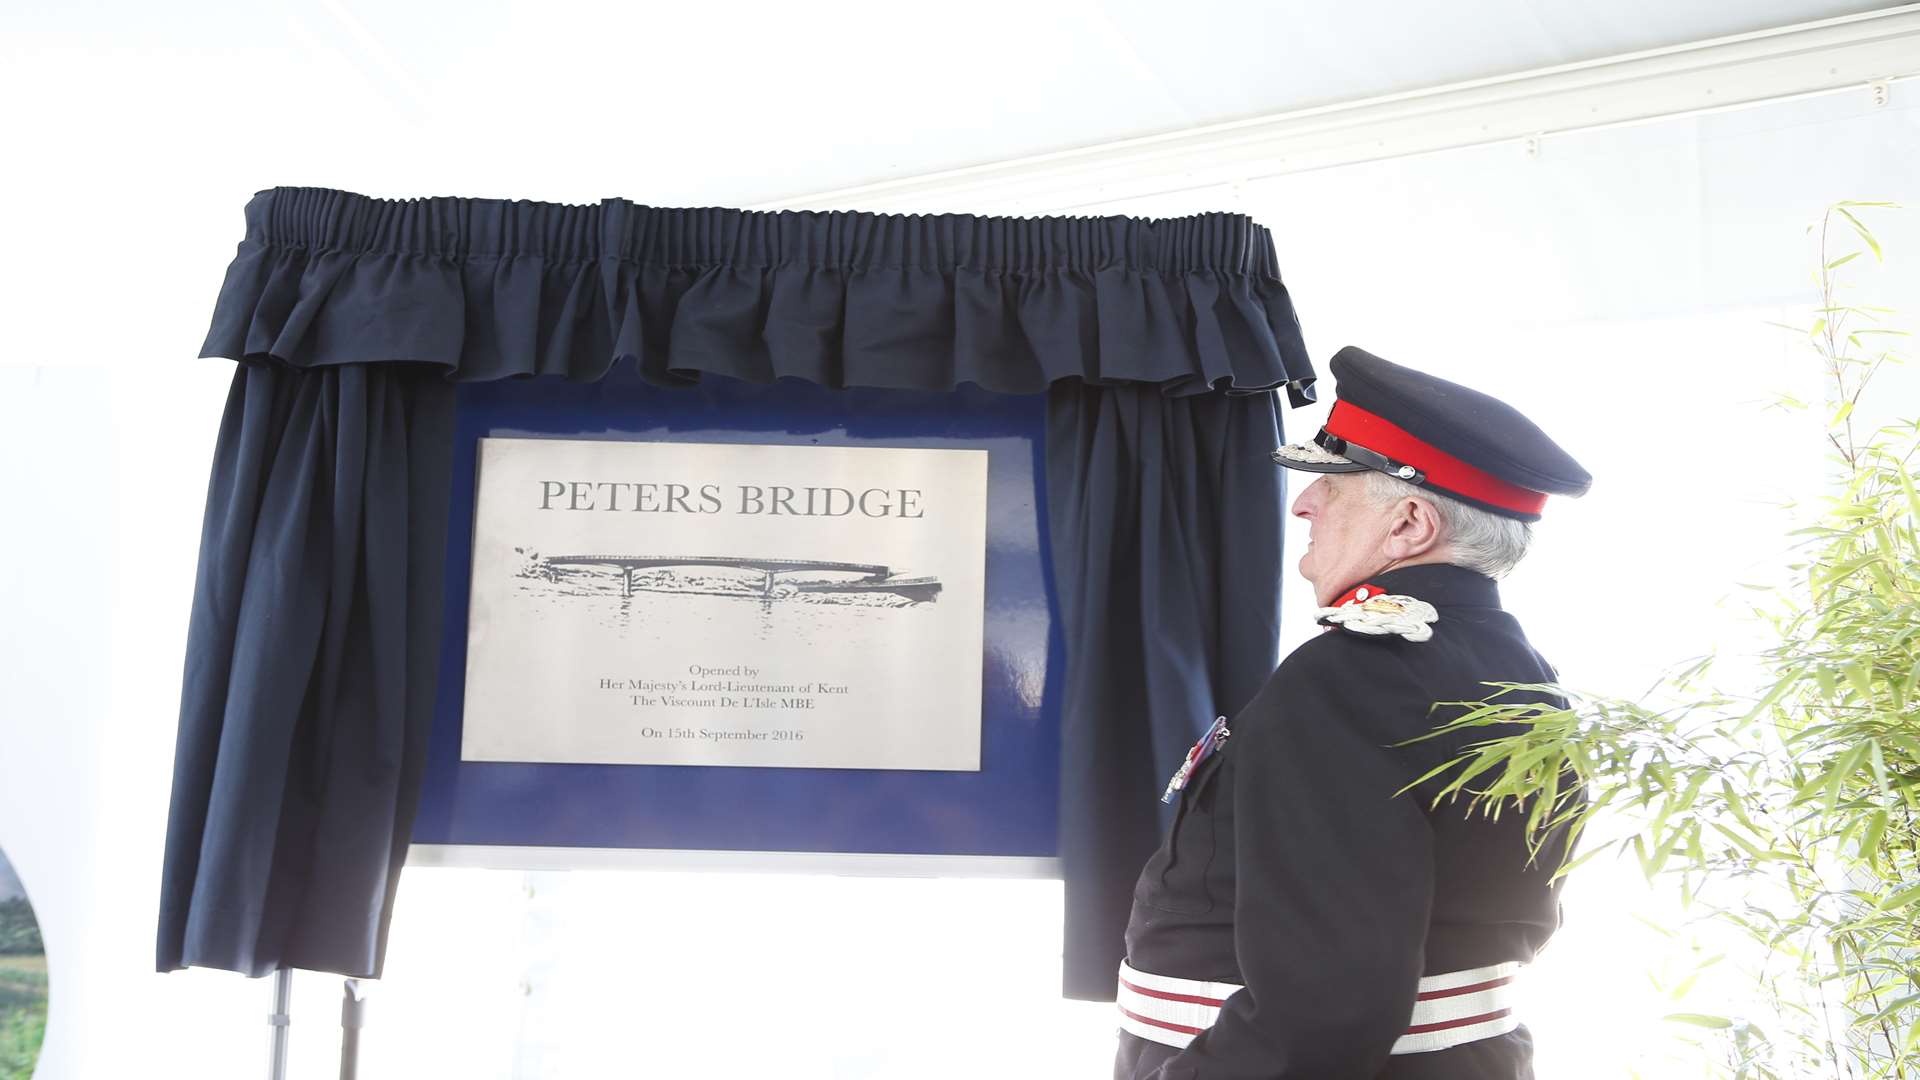 The Lord Lieutenant of Kent unveils a plaque at the opening of the bridge